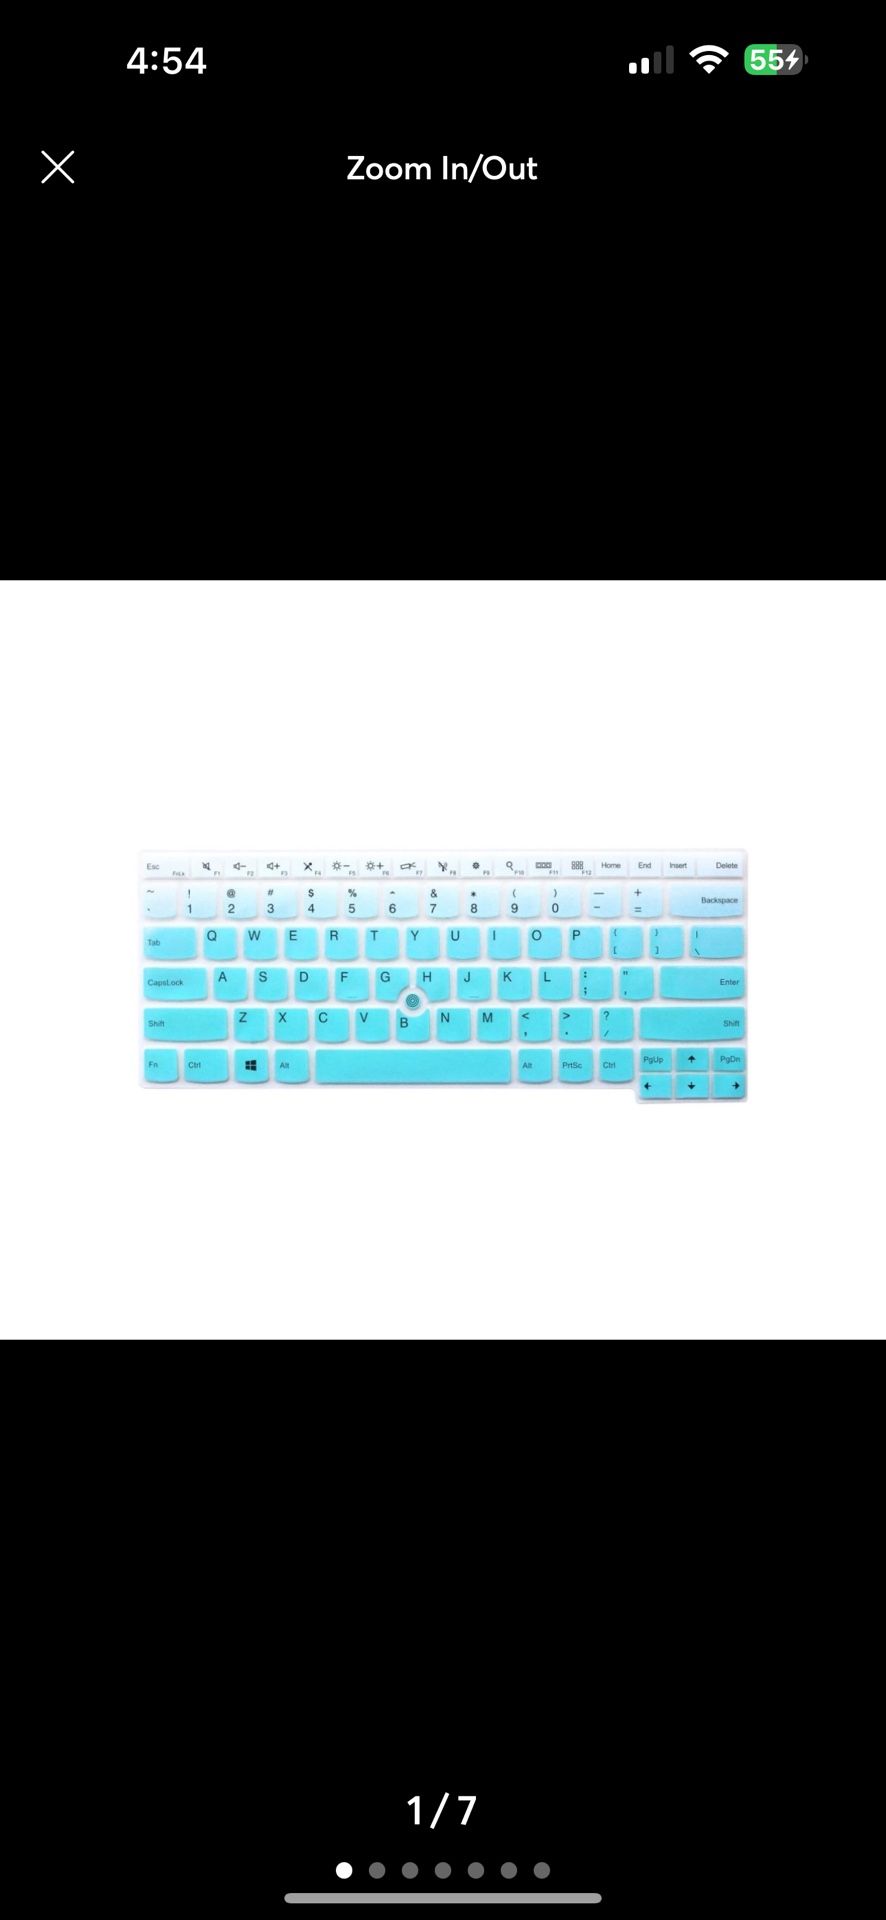 Keyboard Cover Compatible for Lenovo Thinkpad X1 Carbon 14”